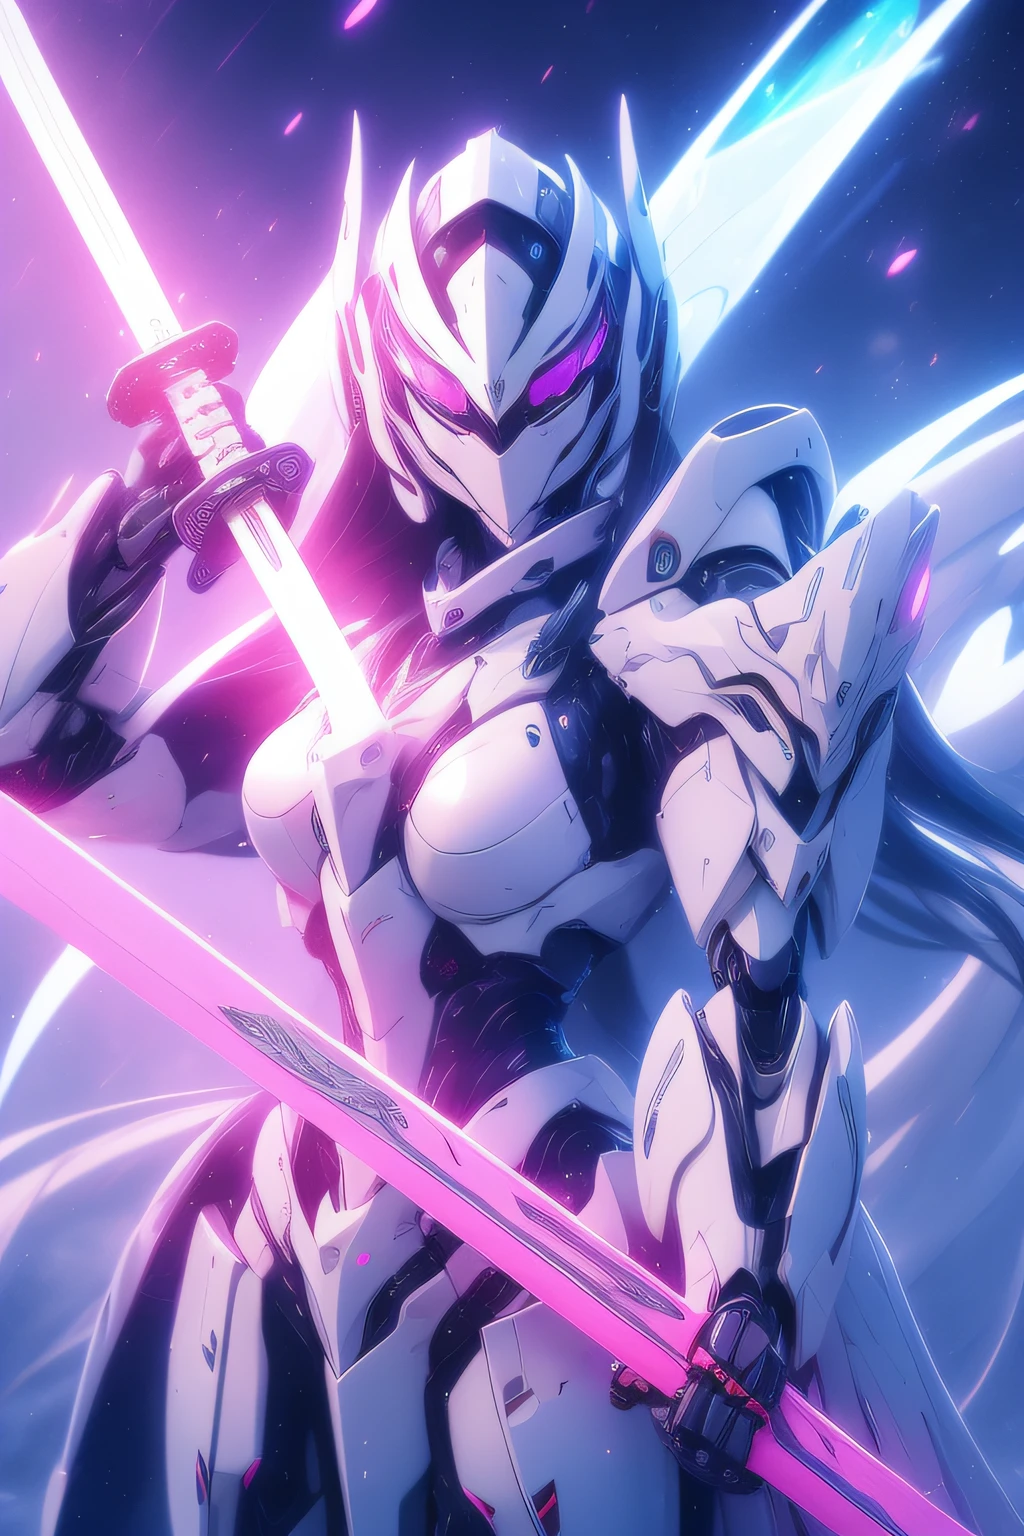 mecha_musume, 1 robot knight, long_hair, science_fiction, weapon, lightsaber, holding_sword, blue_eyes, solo, headdress, holding_weapon, mecha, bust, pink and white livery, angel halo, sad gaze, upper body, mermaid line,